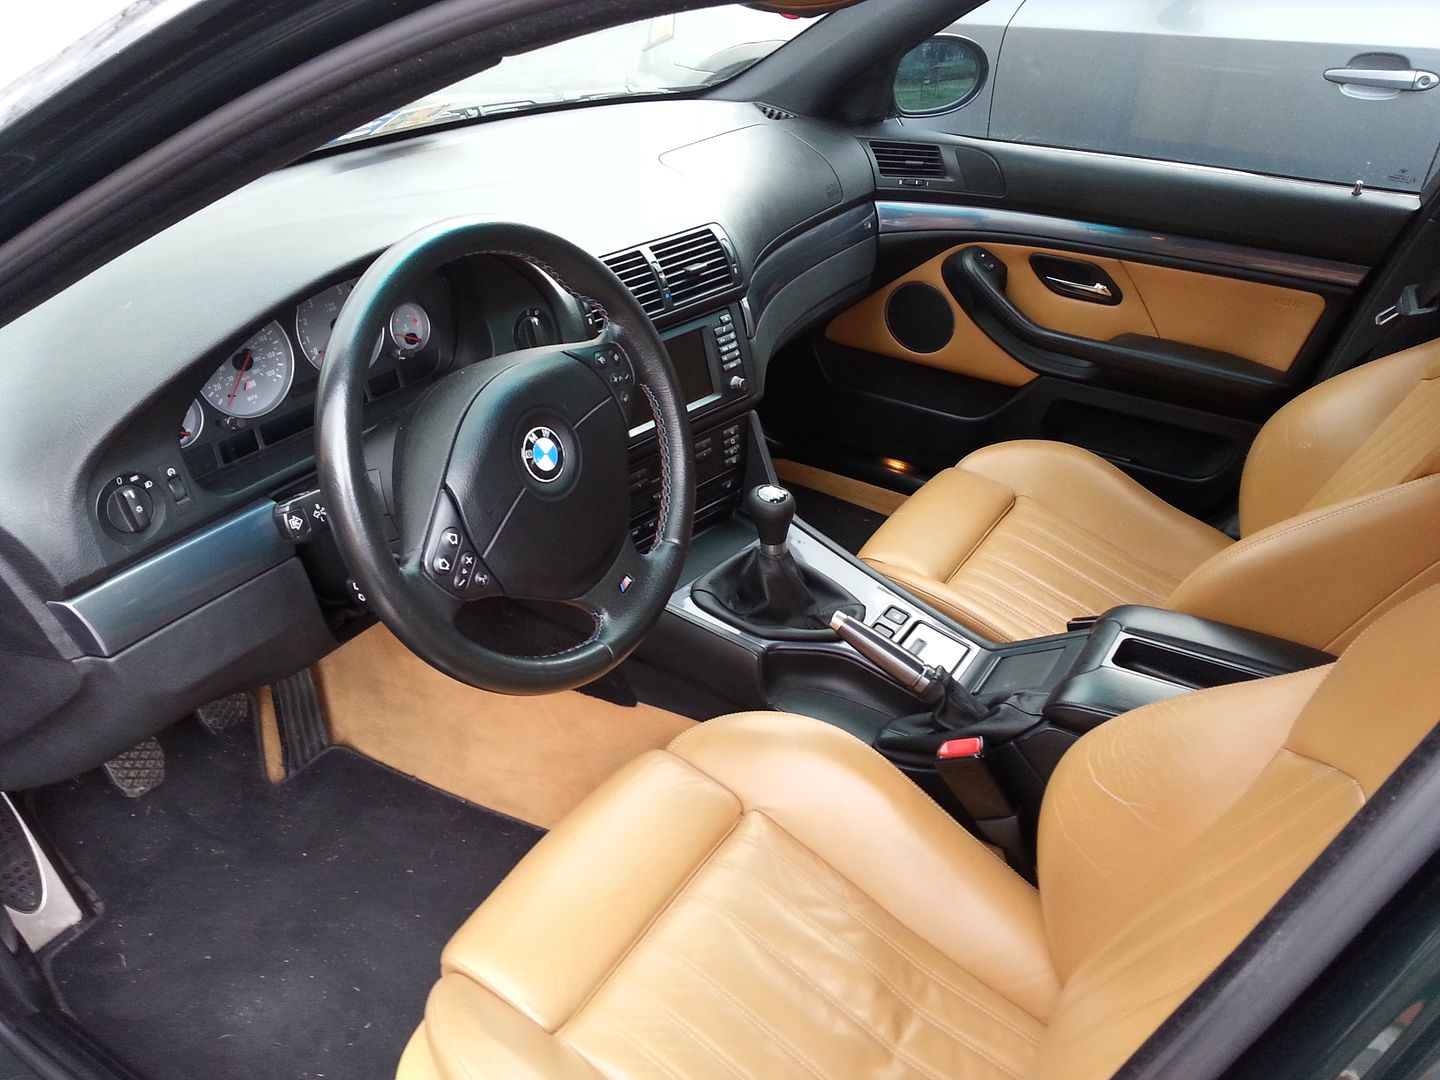 Oxford Green E39 M5 Check In Bmw M5 Forum And M6 Forums